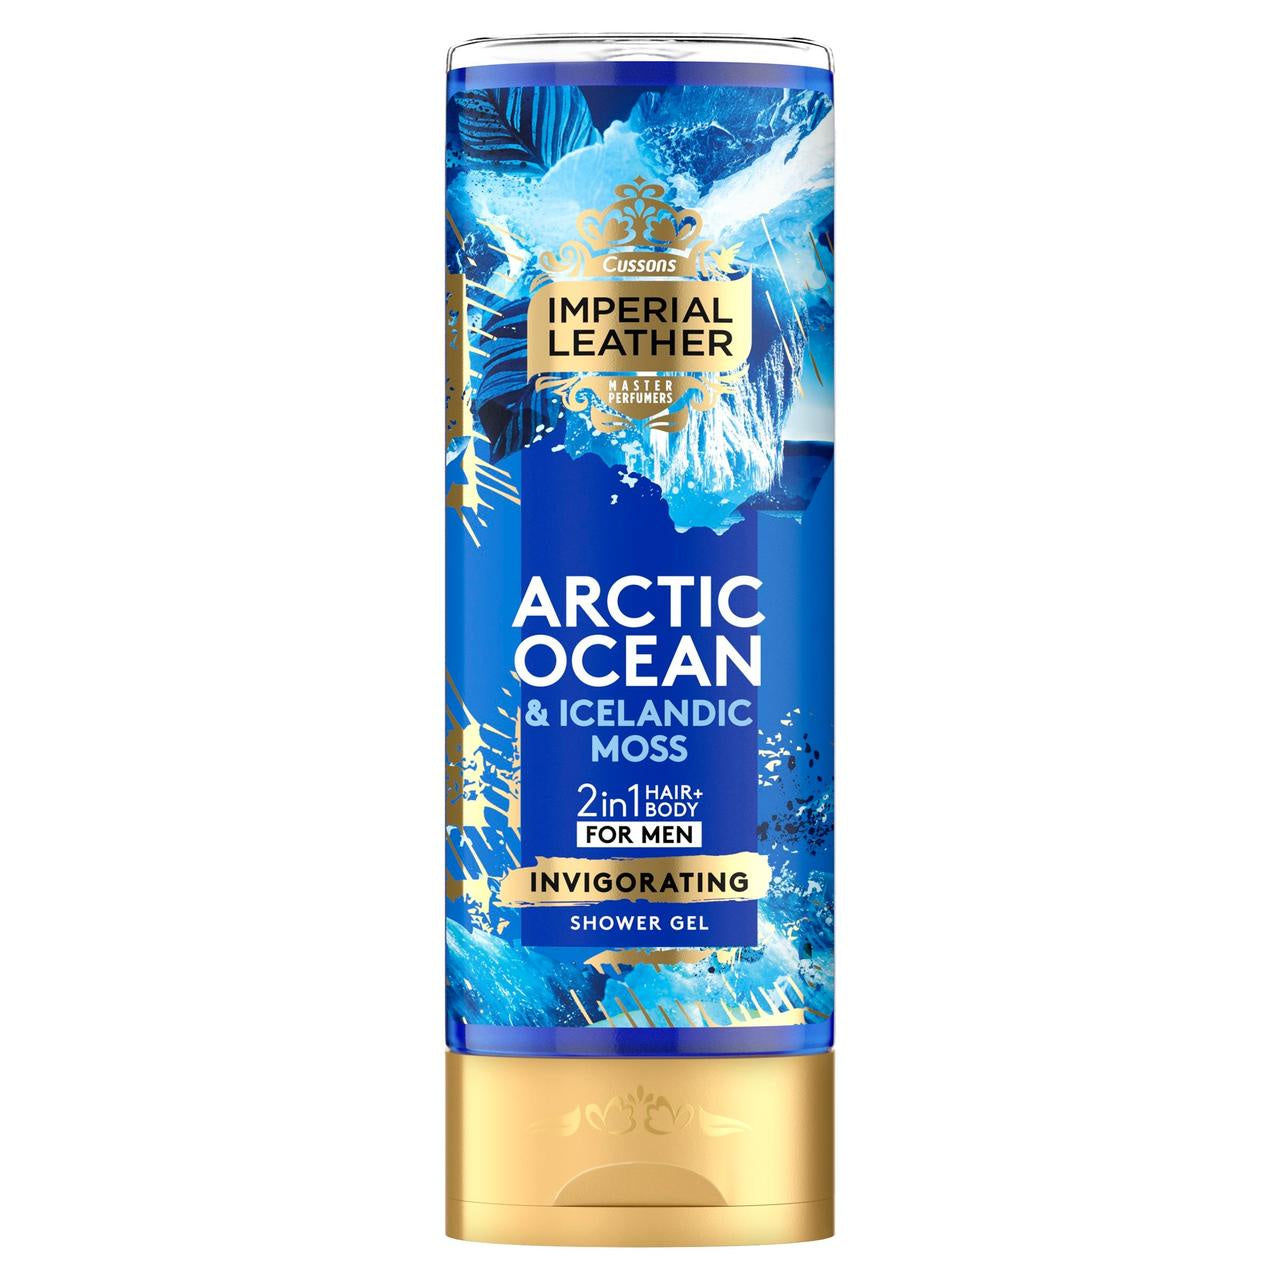 Imperial Leather Shower Gel Cotton Arctic Ocean & Moss 250ml*